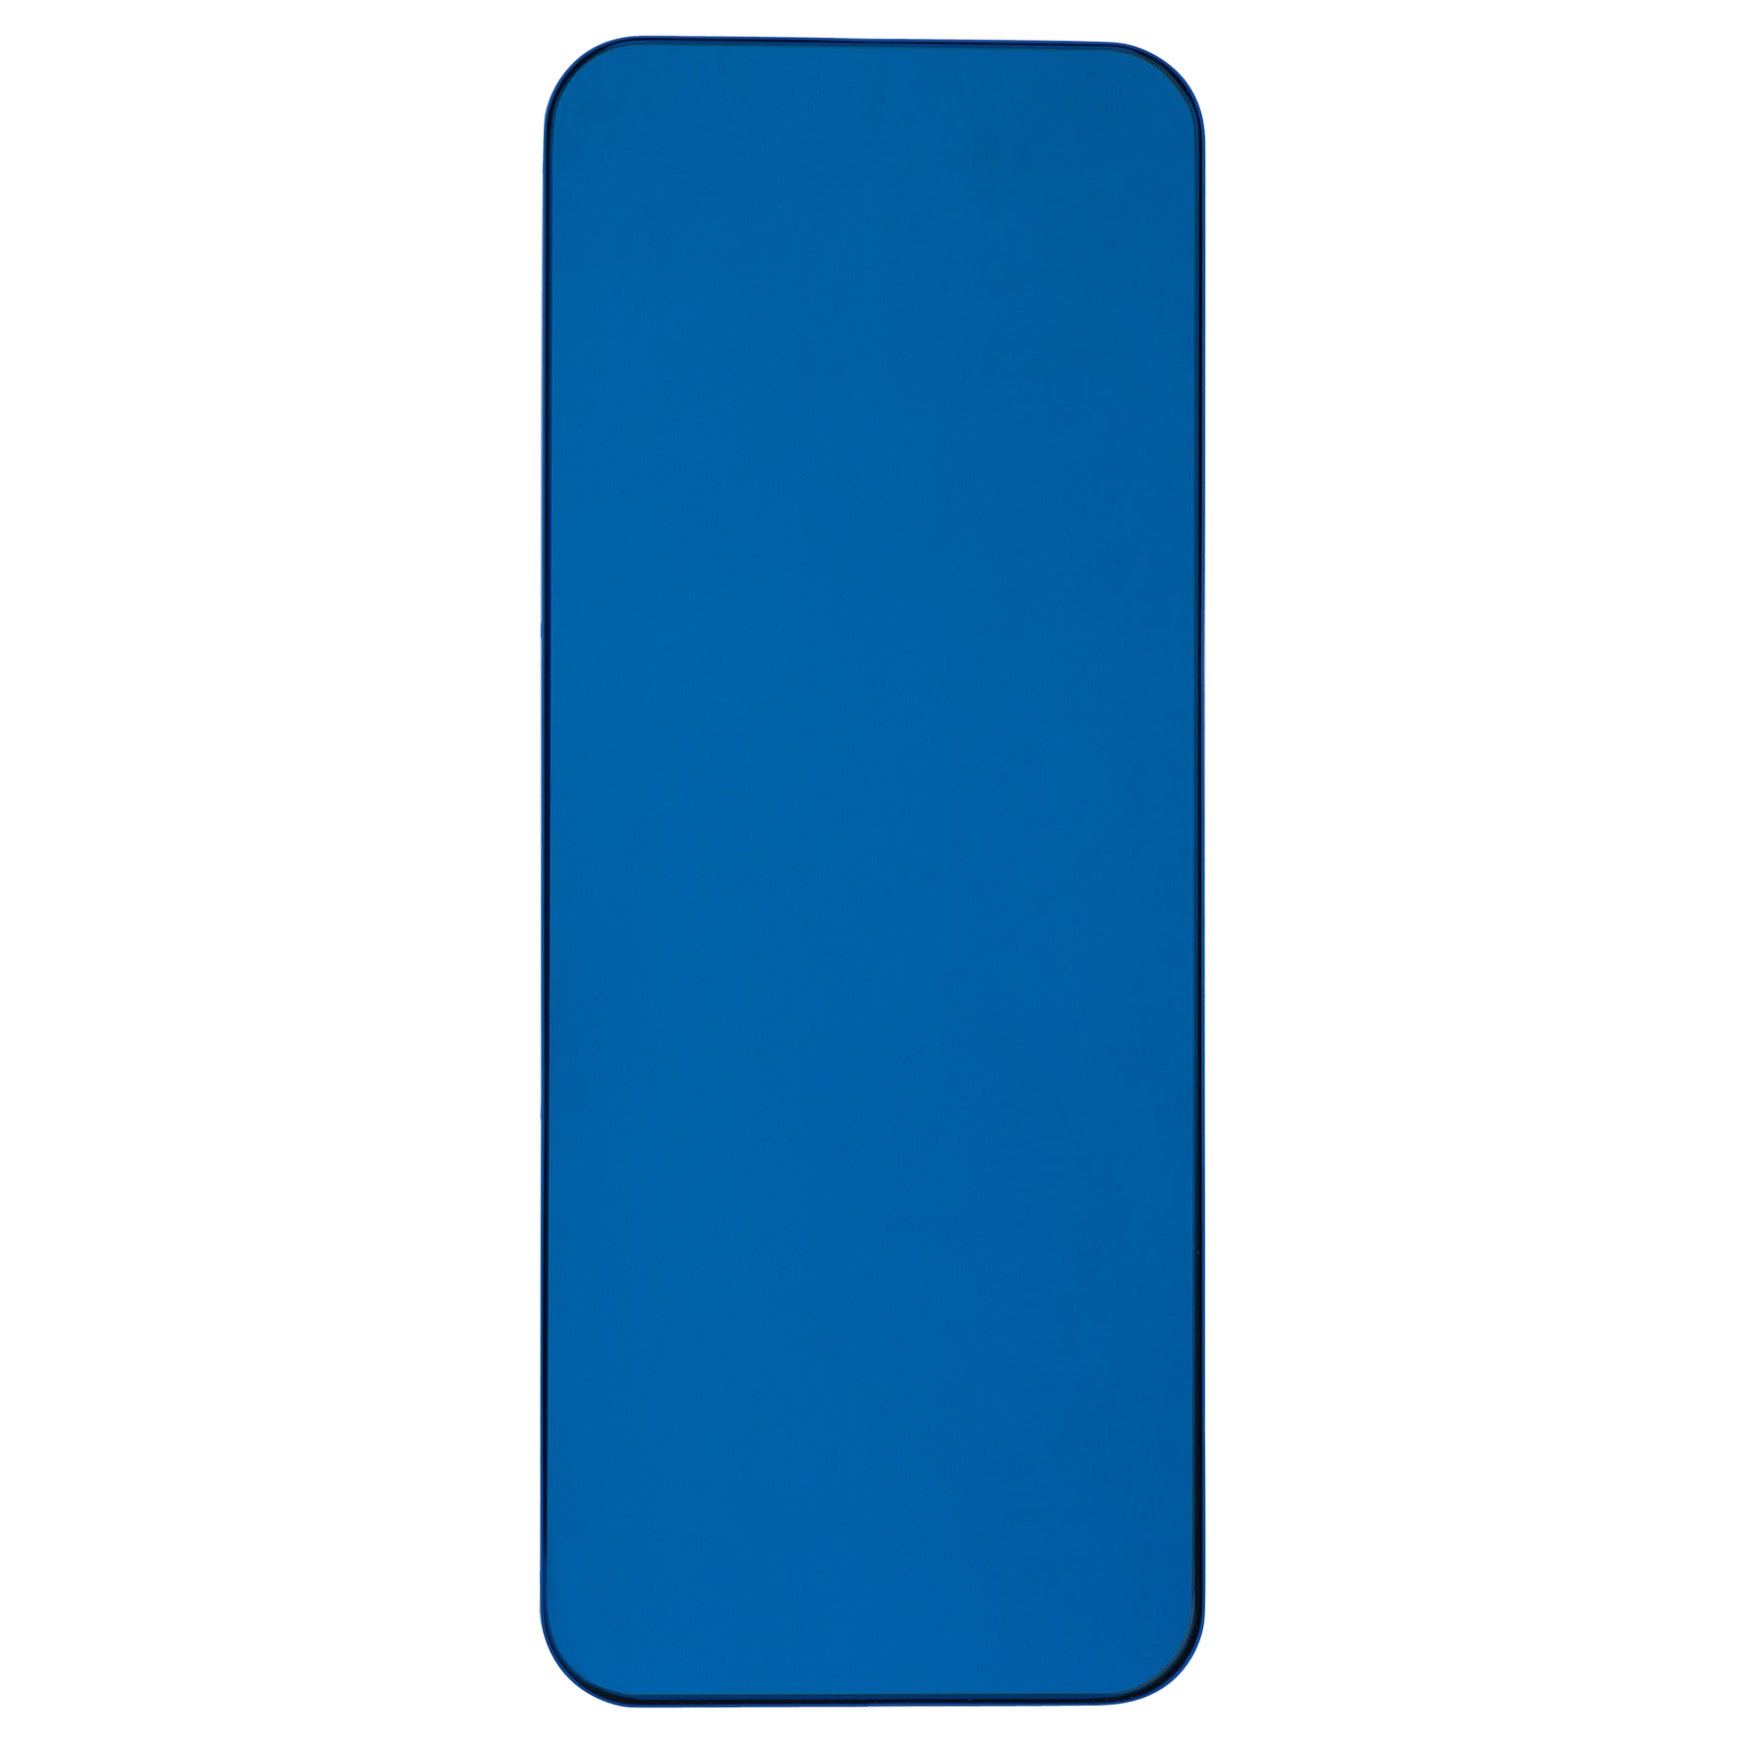 Quadris Rectangular Contemporary Blue Tinted Mirror with a Blue Frame, Large